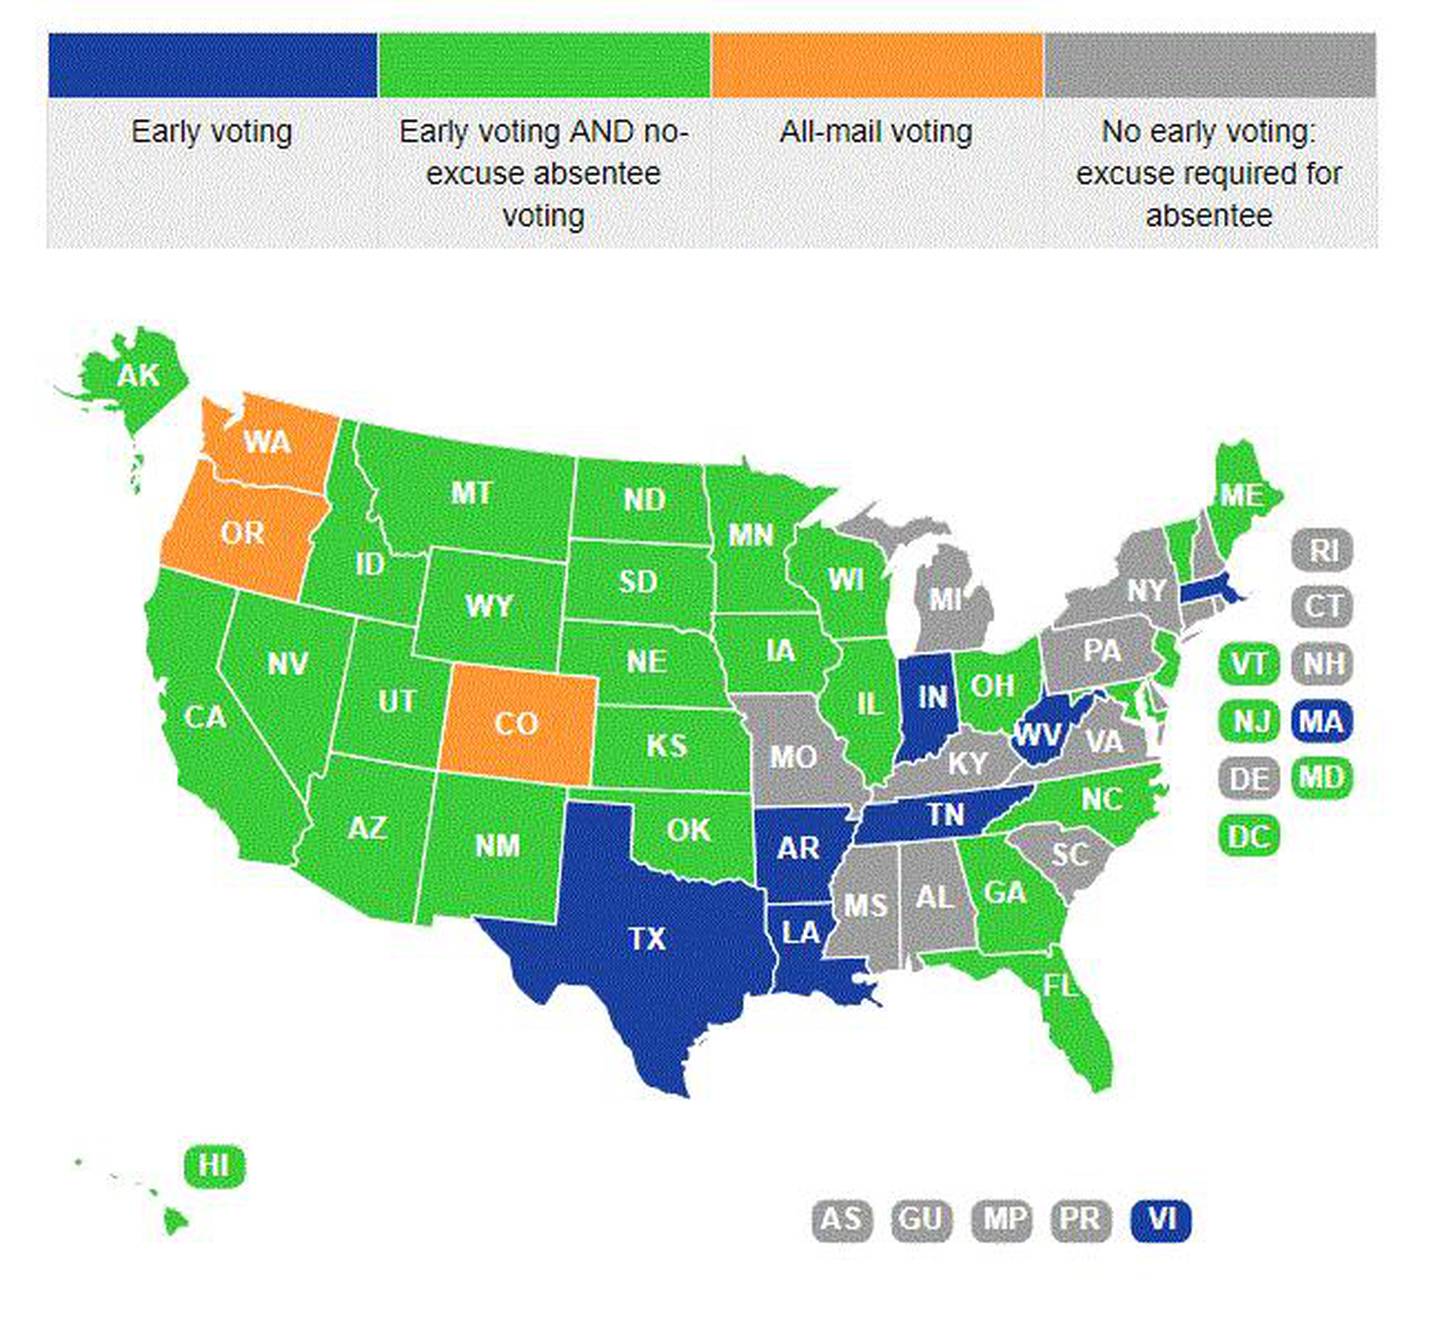 In the US, 37 states and Washington DC allow some form of early voting. National Conference of State Legislators